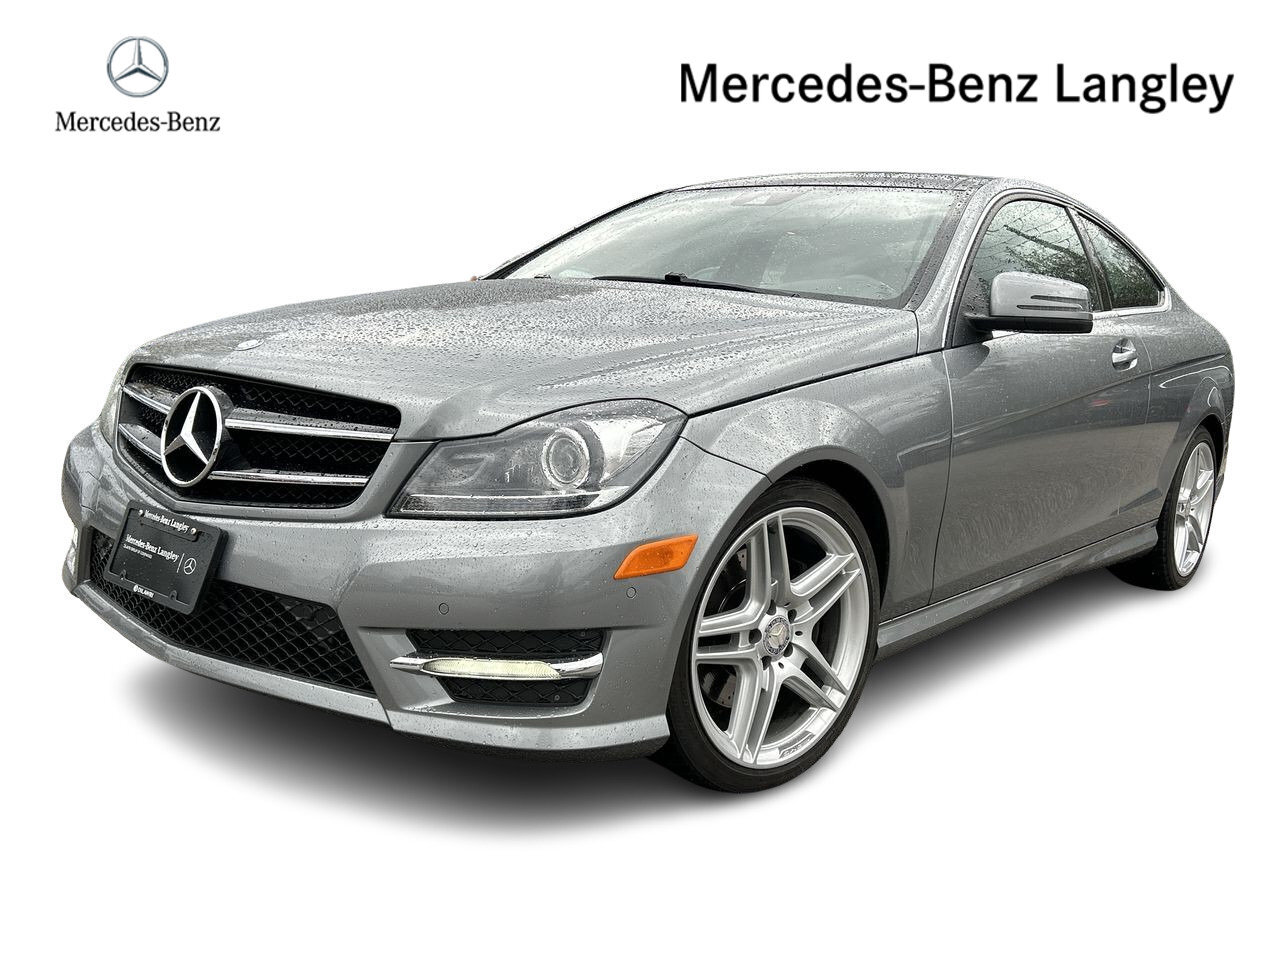 2014 Mercedes-Benz C350 4MATIC Coupe low kms!